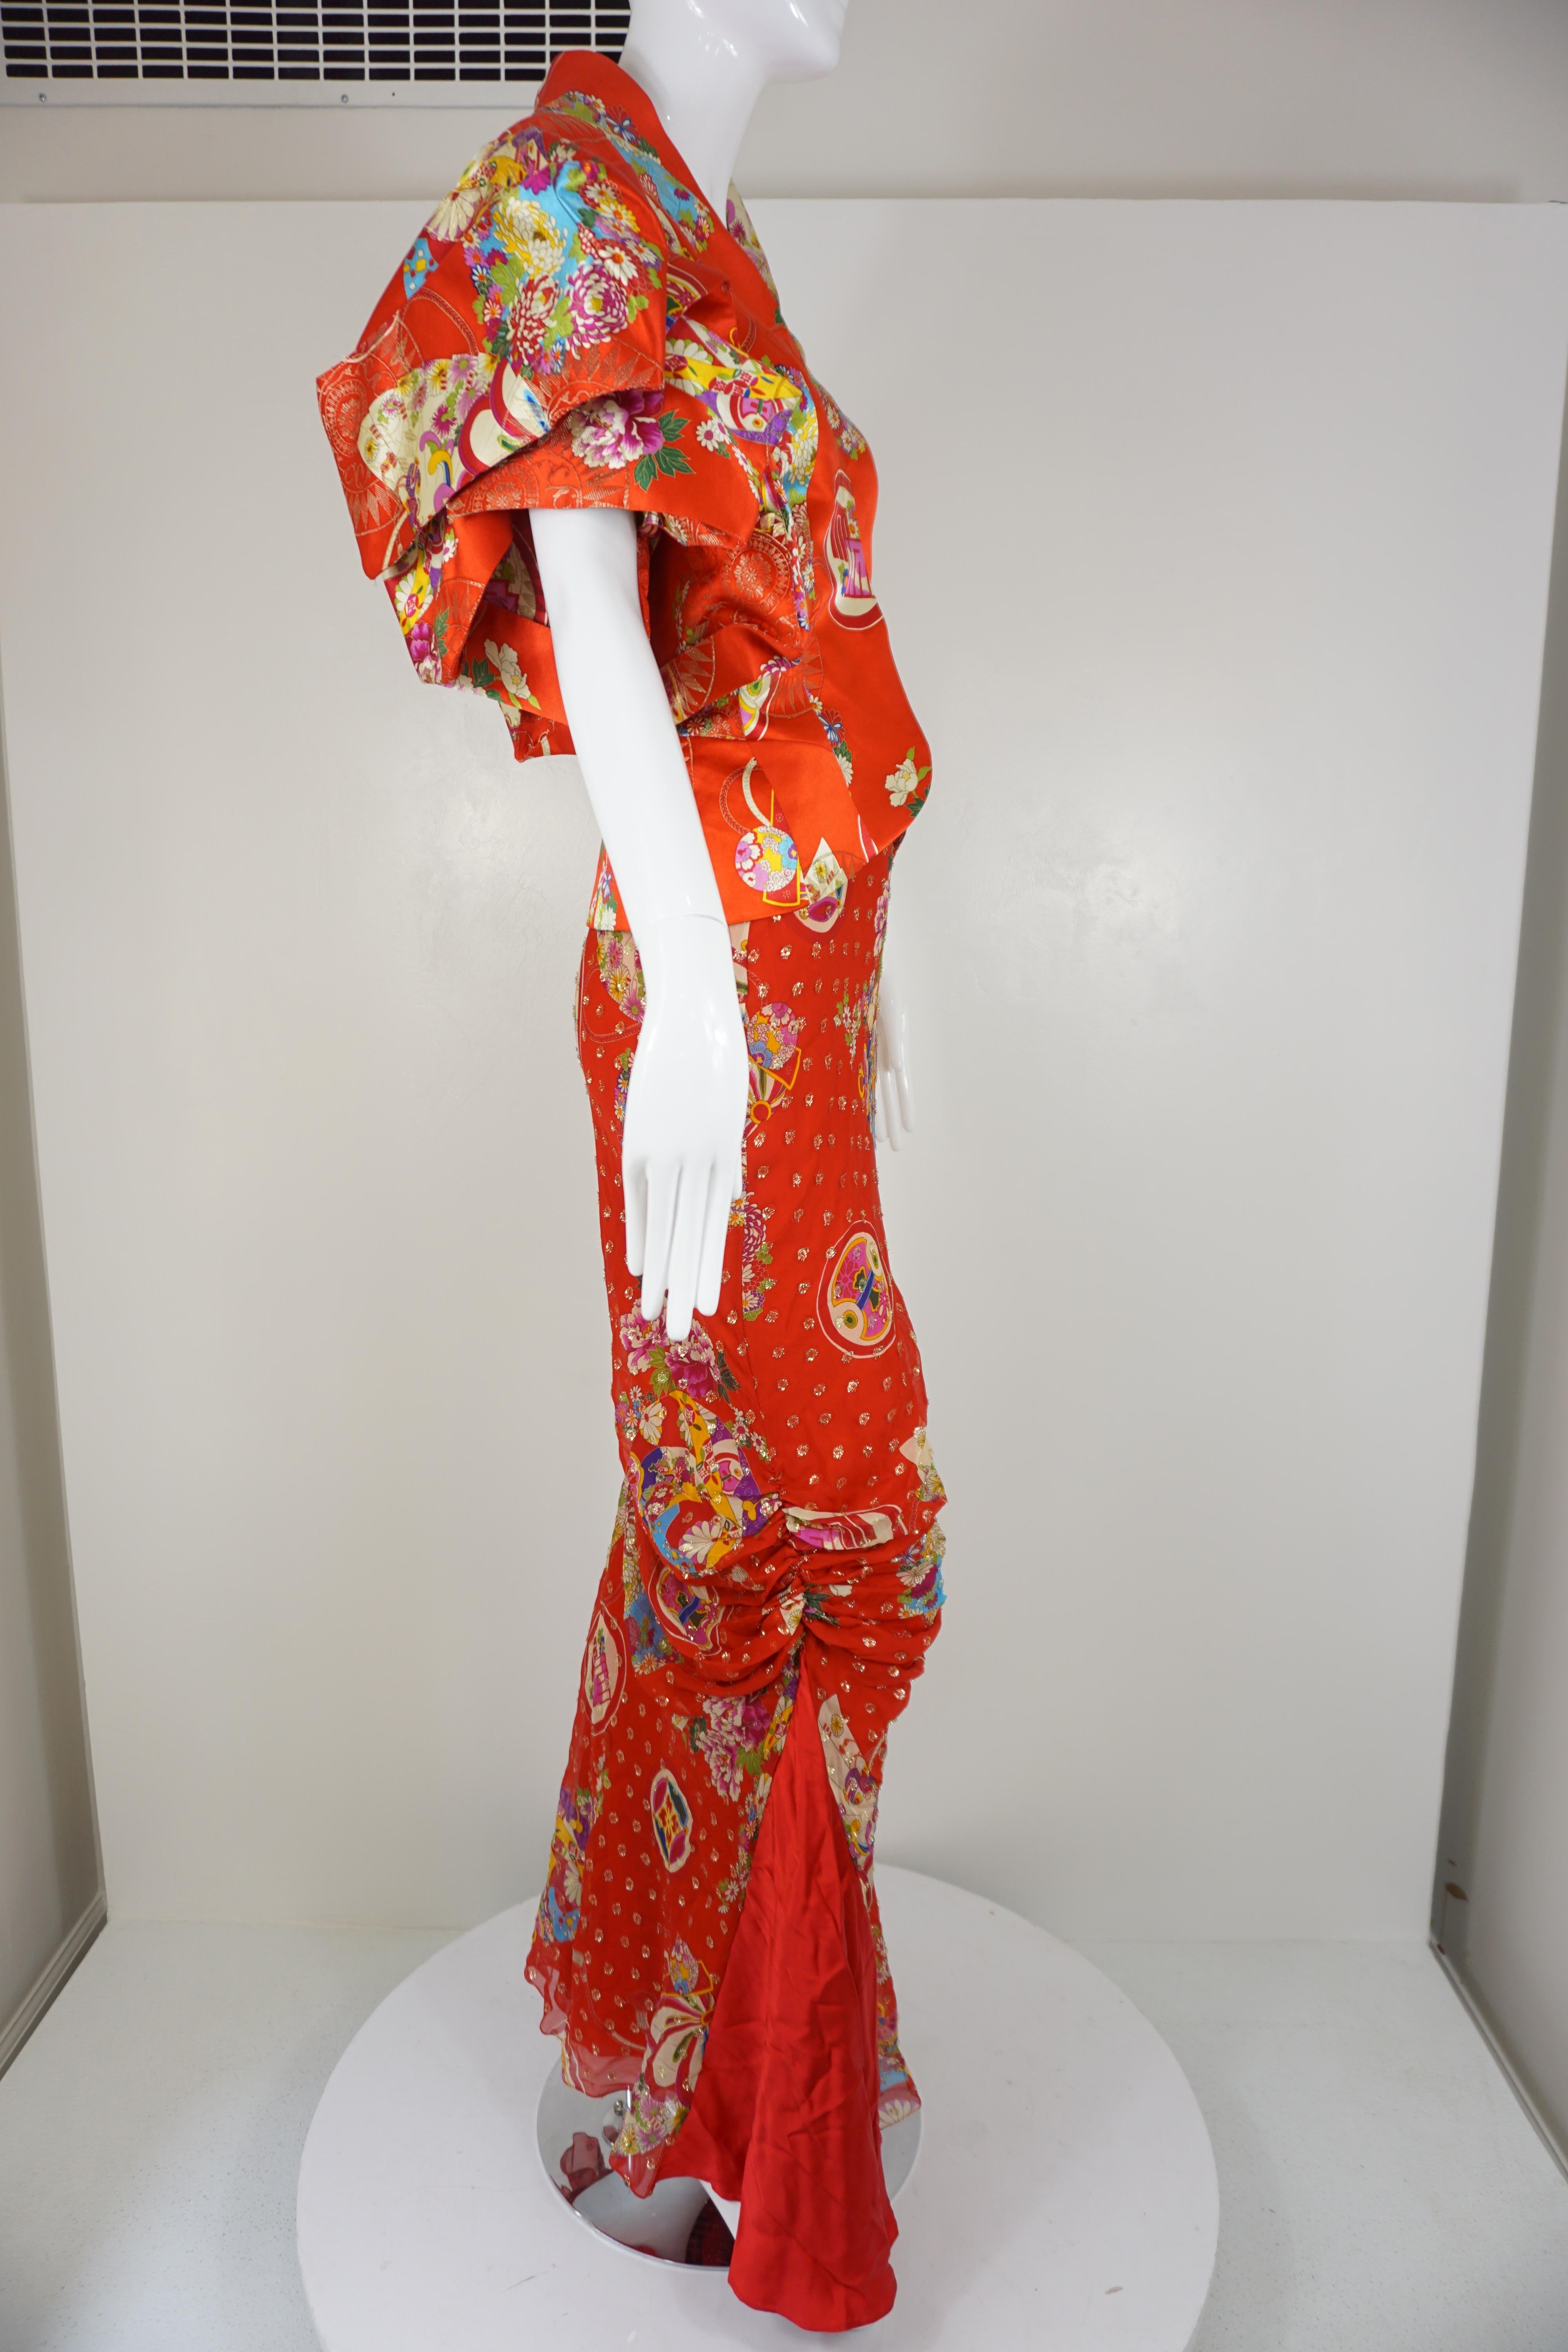 John Galliano designed Christian Dior jacket and skirt, from the 2003 runway collection, is featured in a red silk blend, with a colorful Chinese pattern and metallic jacquard stitching. The fully lined skirt has an exterior that is ruched on both